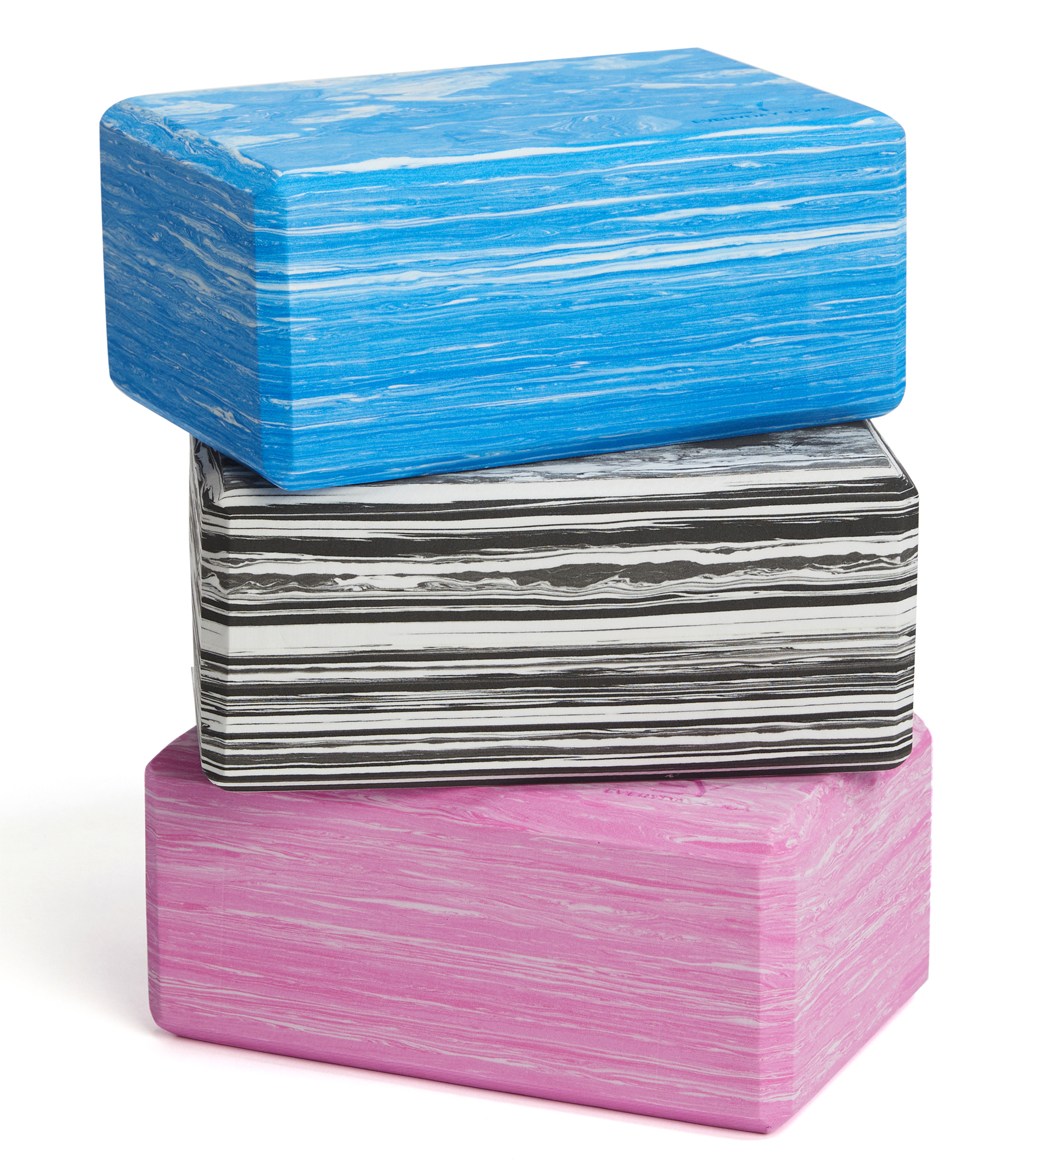 Everyday Yoga 4 Inch Yoga Block at YogaOutlet.com –